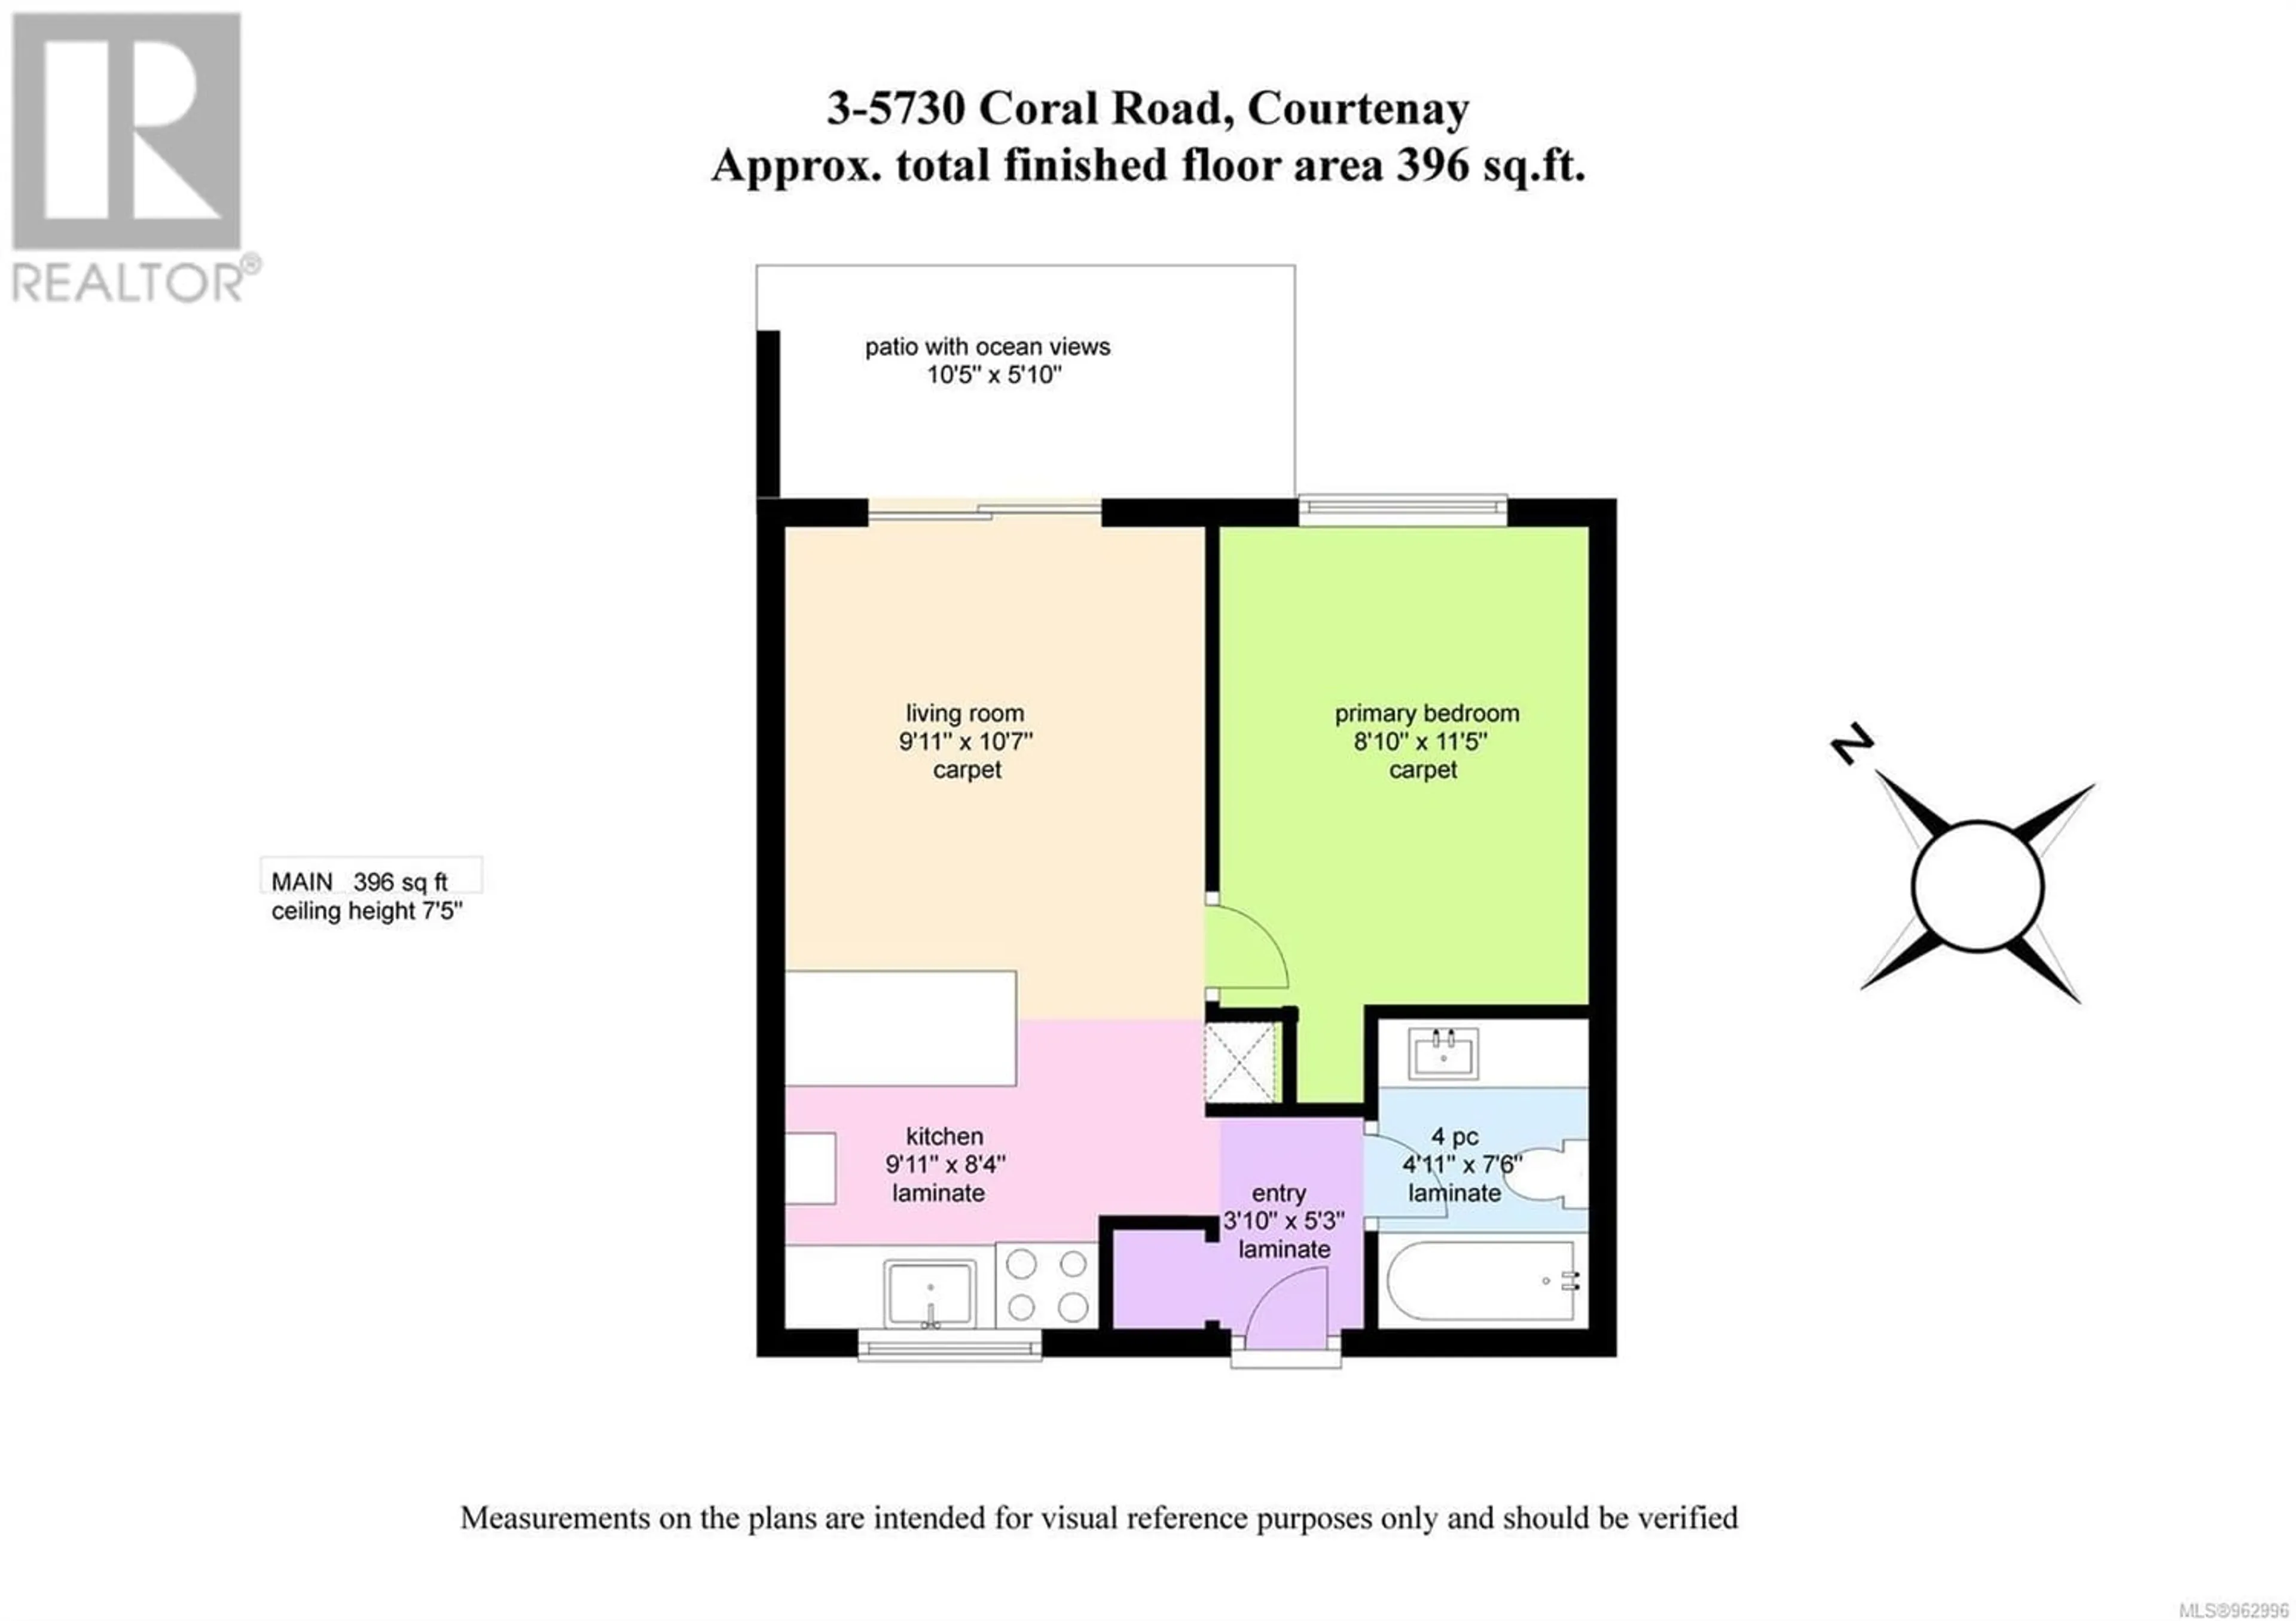 Floor plan for 3 5730 Coral Rd, Courtenay British Columbia V9J1W9